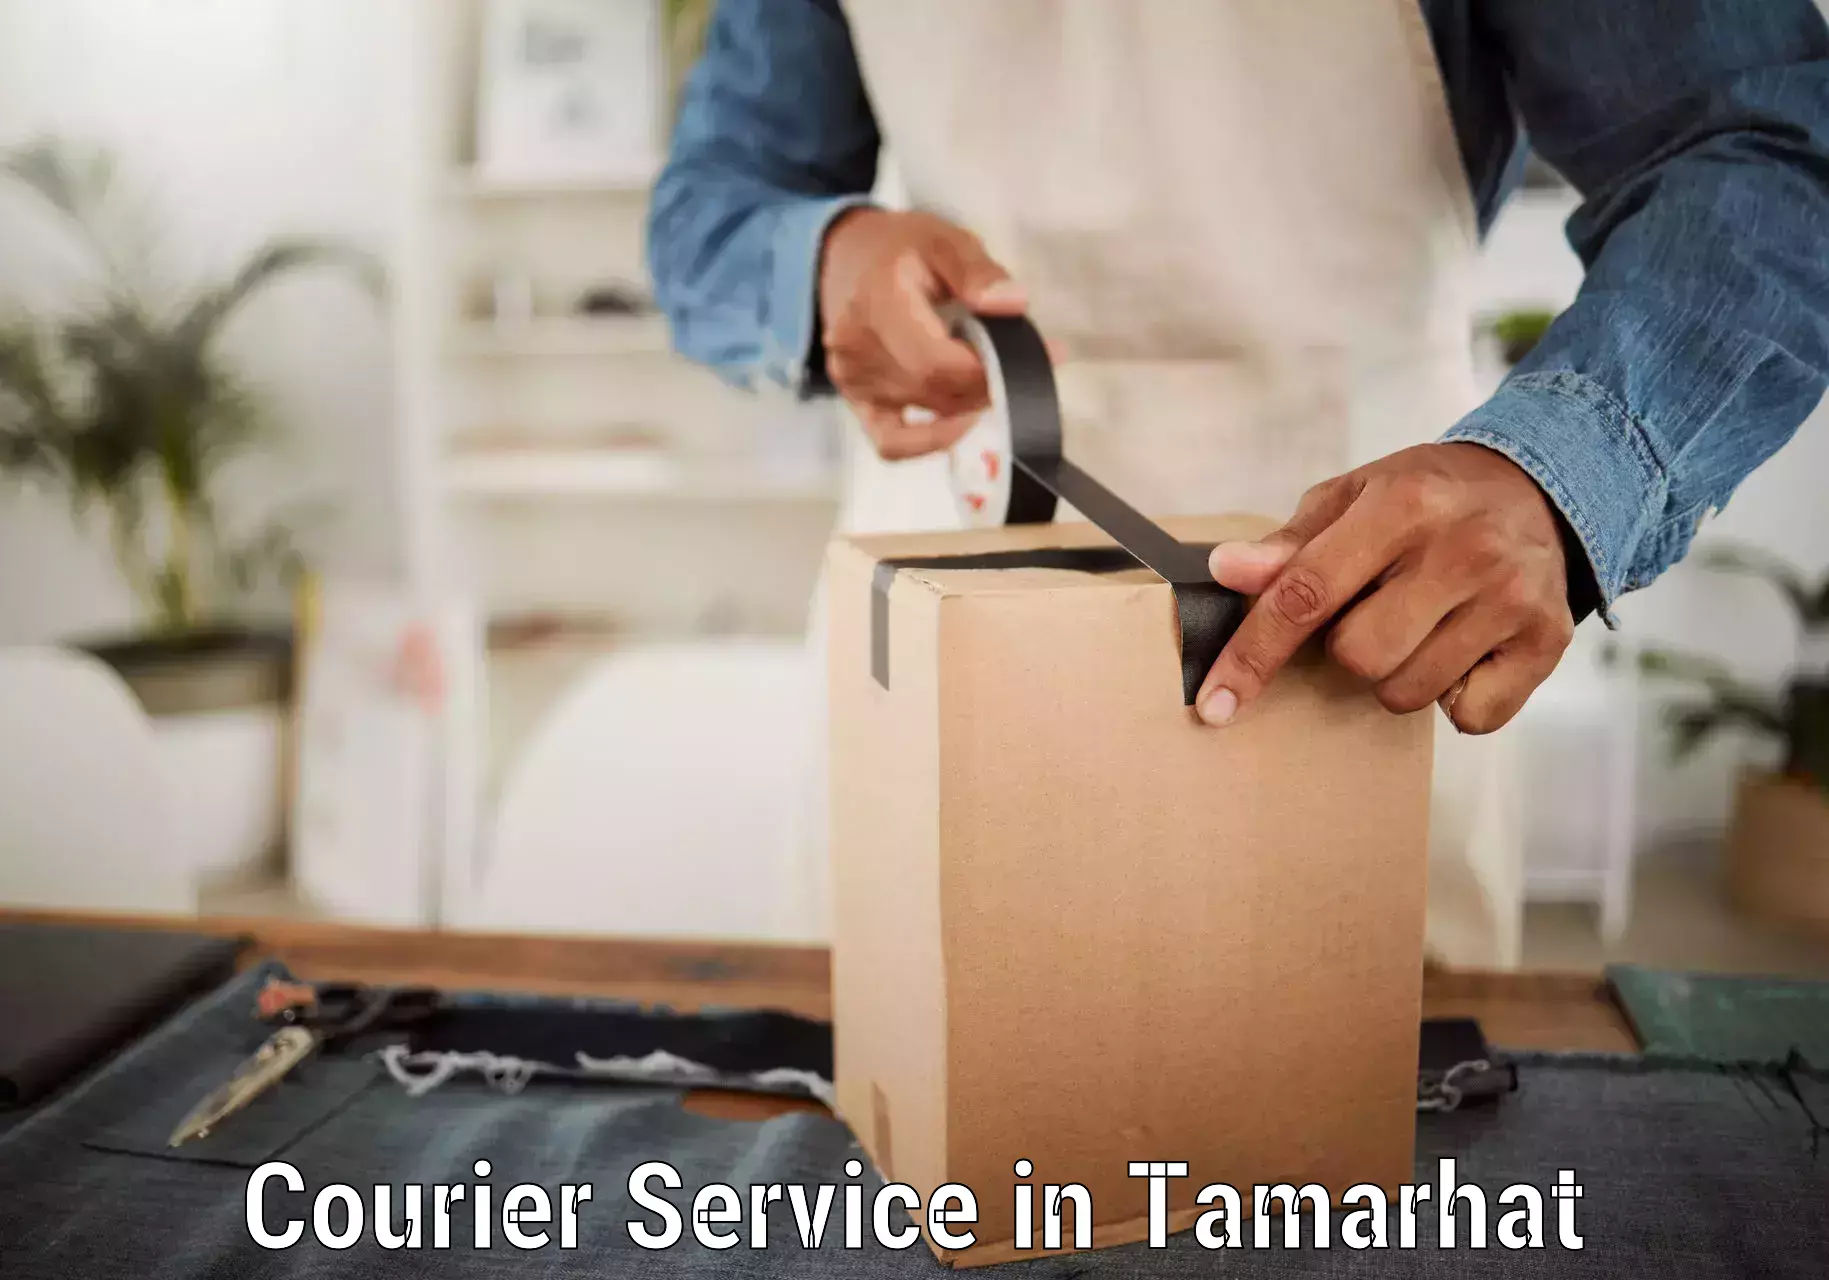 Sustainable courier practices in Tamarhat